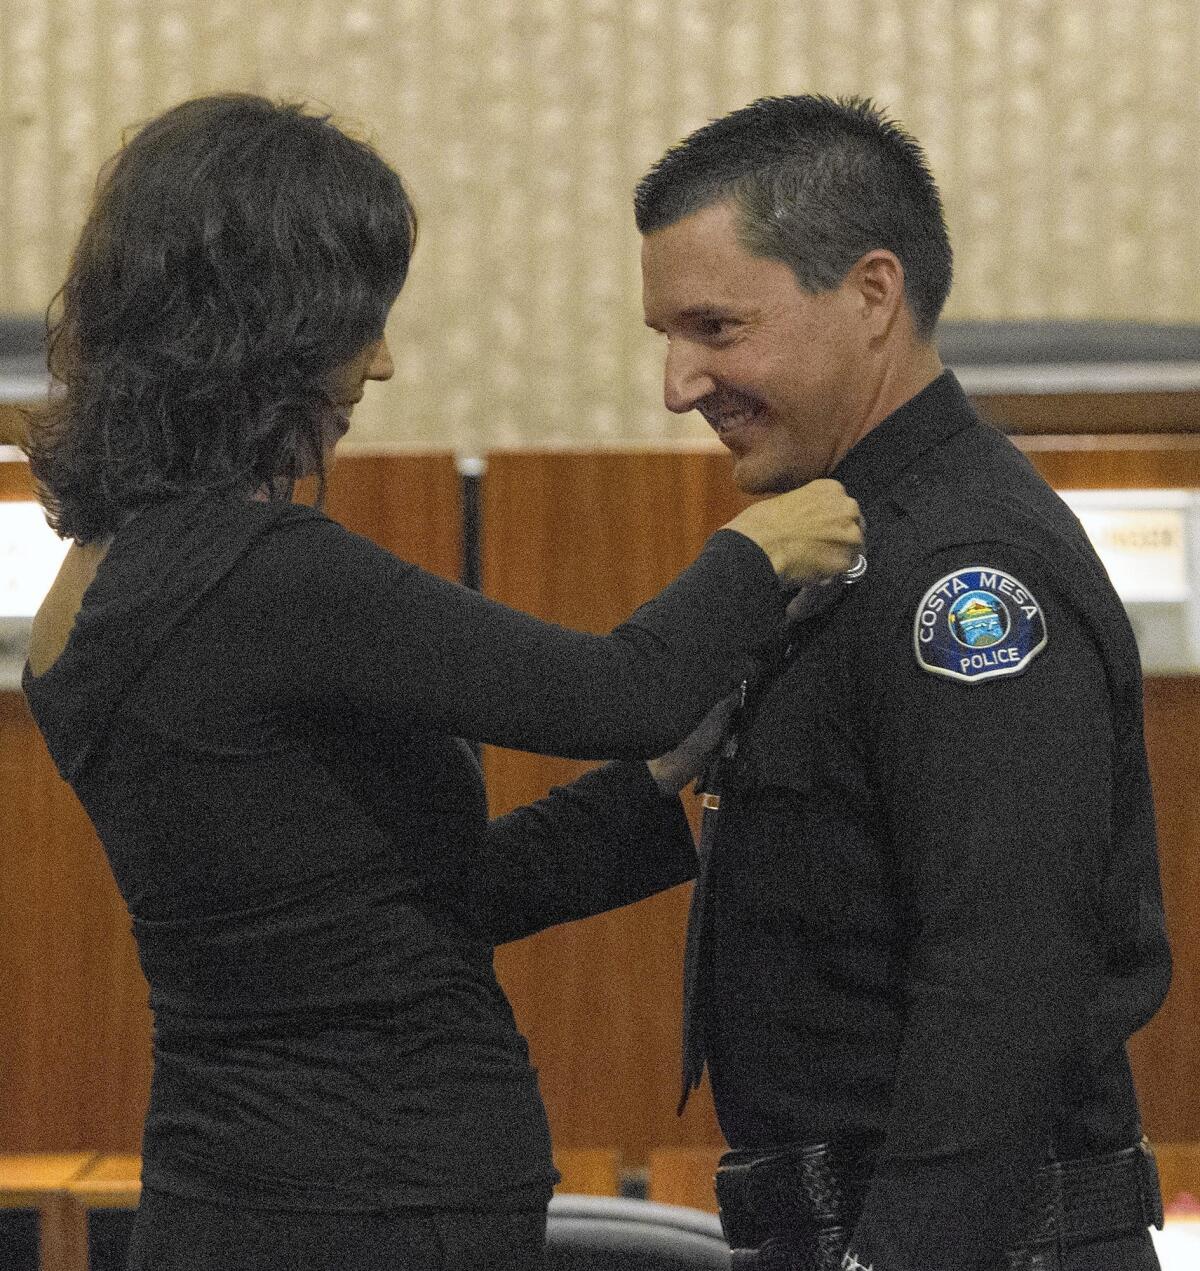 Bryan Glass' wife, Irene, pins on his new captain badge during a Costa Mesa Police Department promotion ceremony in 2015.